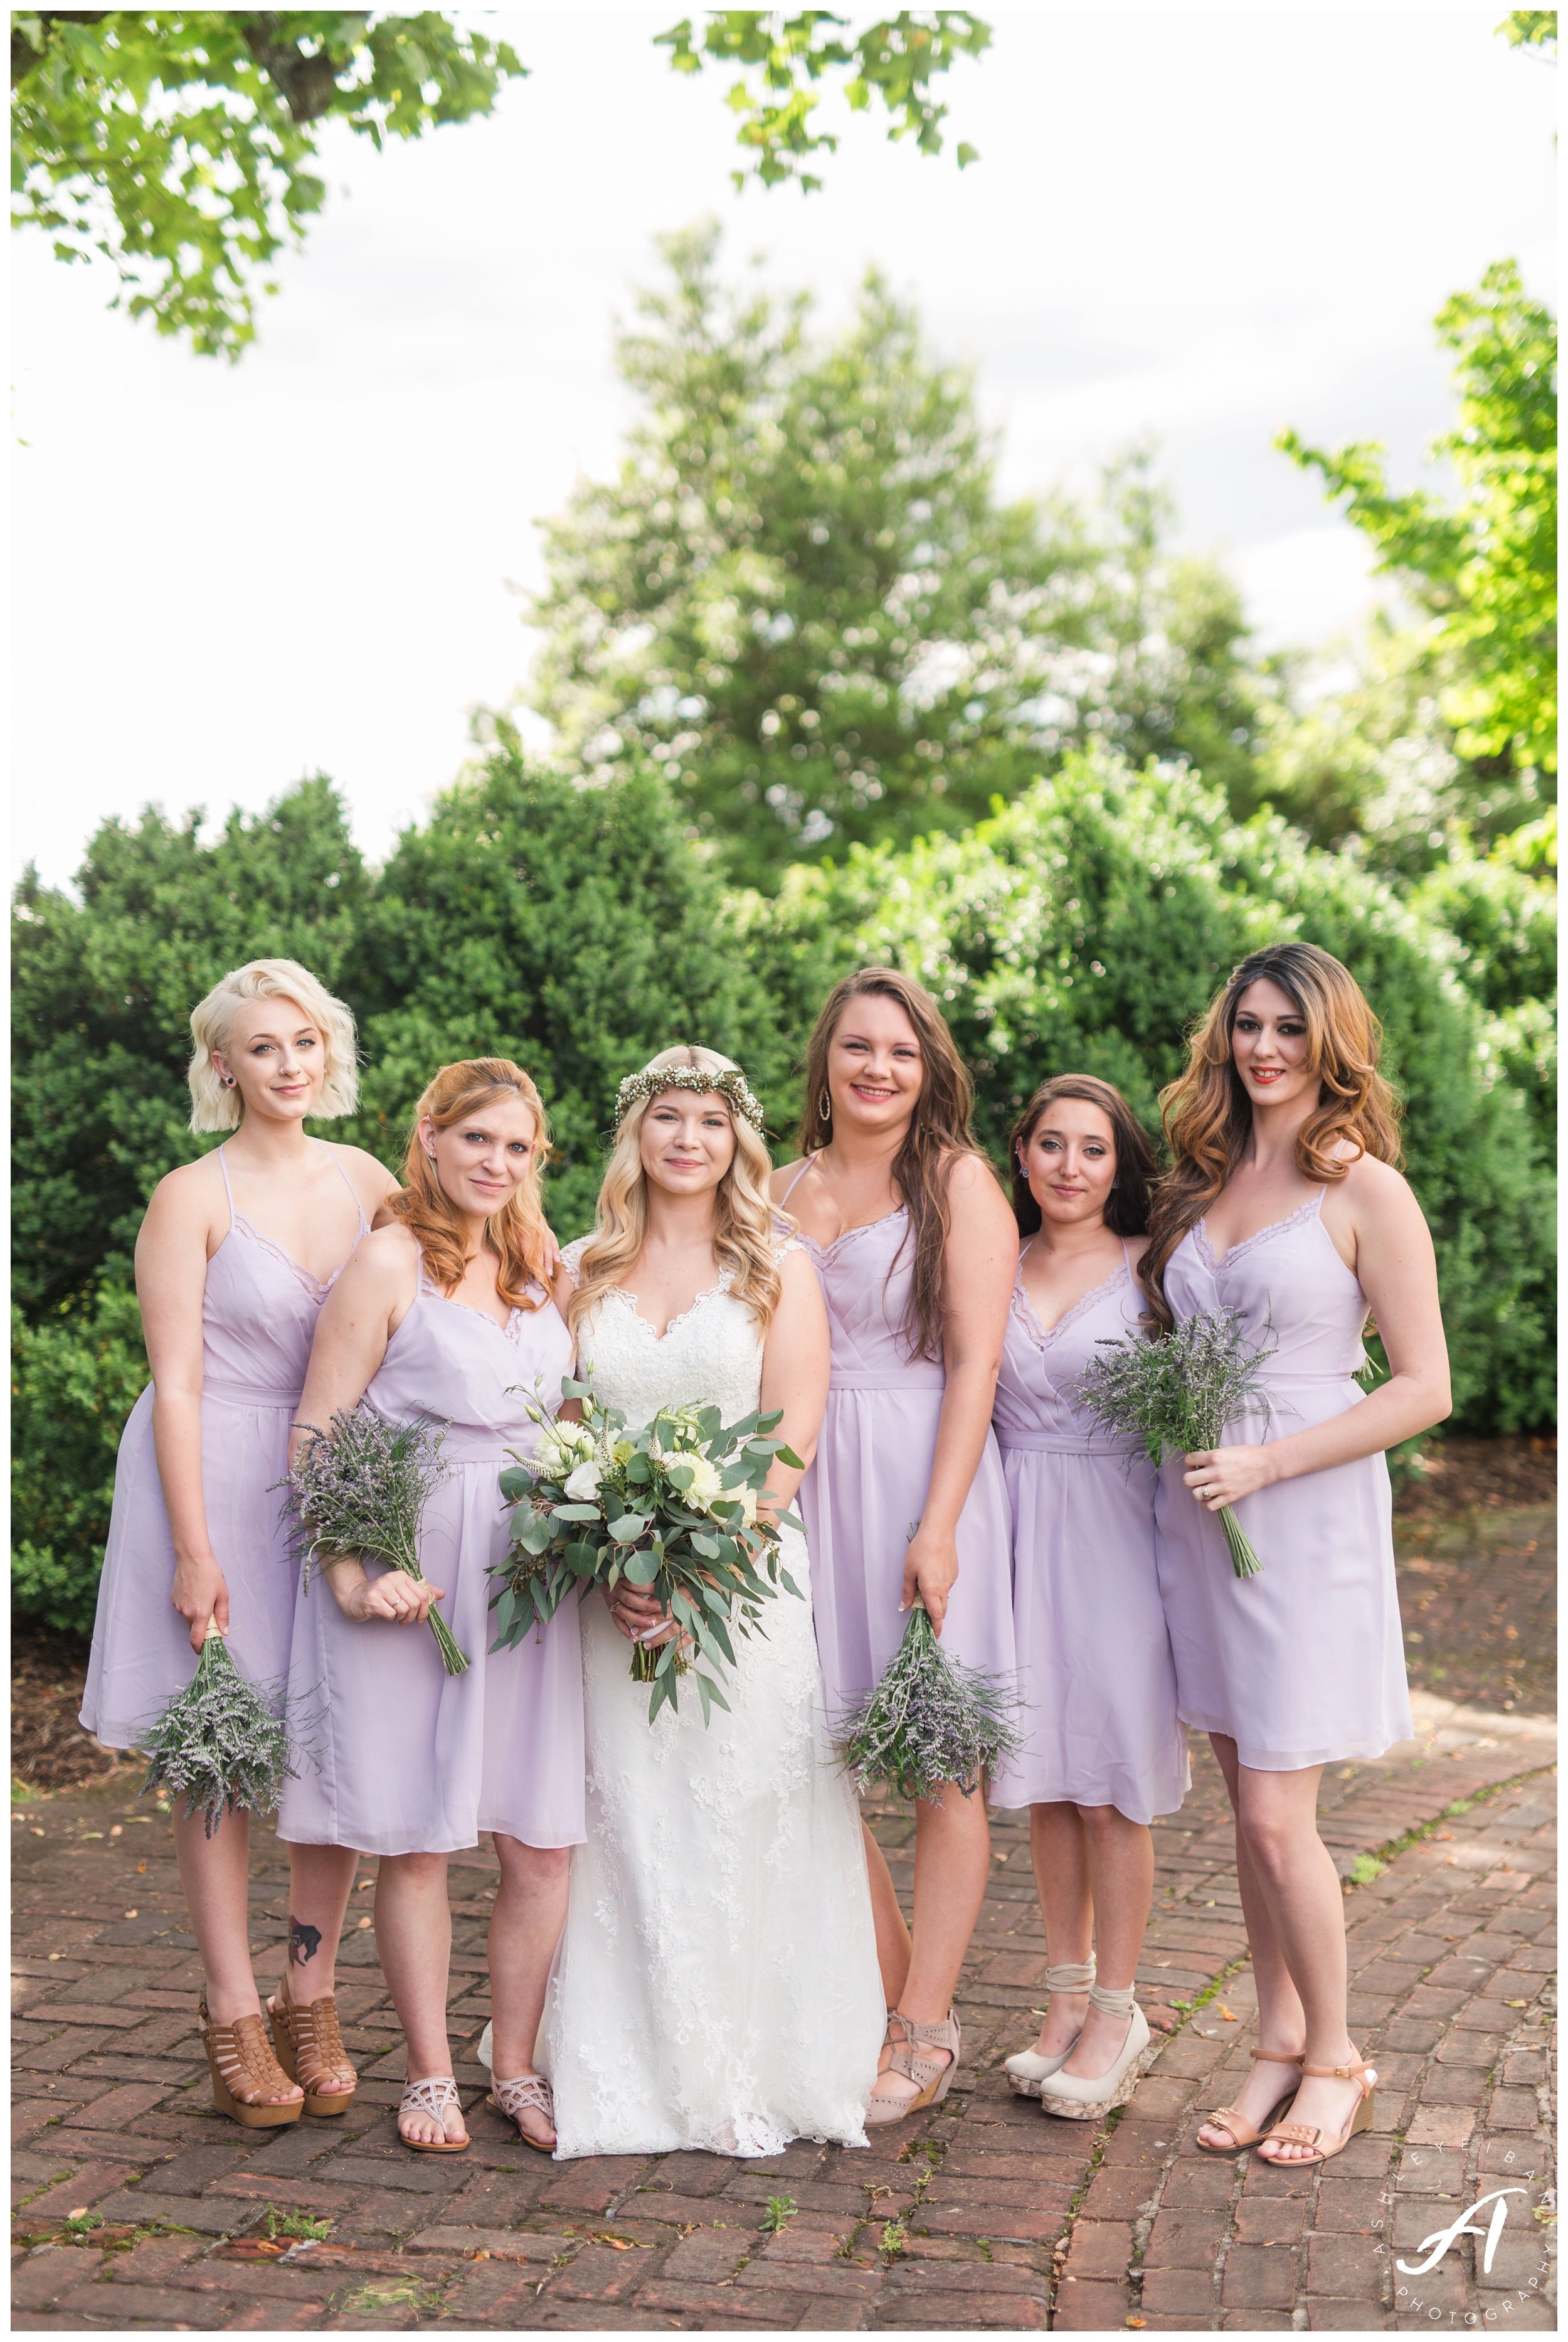 Monday Minute: Dreamy weddings and Mother's Day — Ashley Eiban